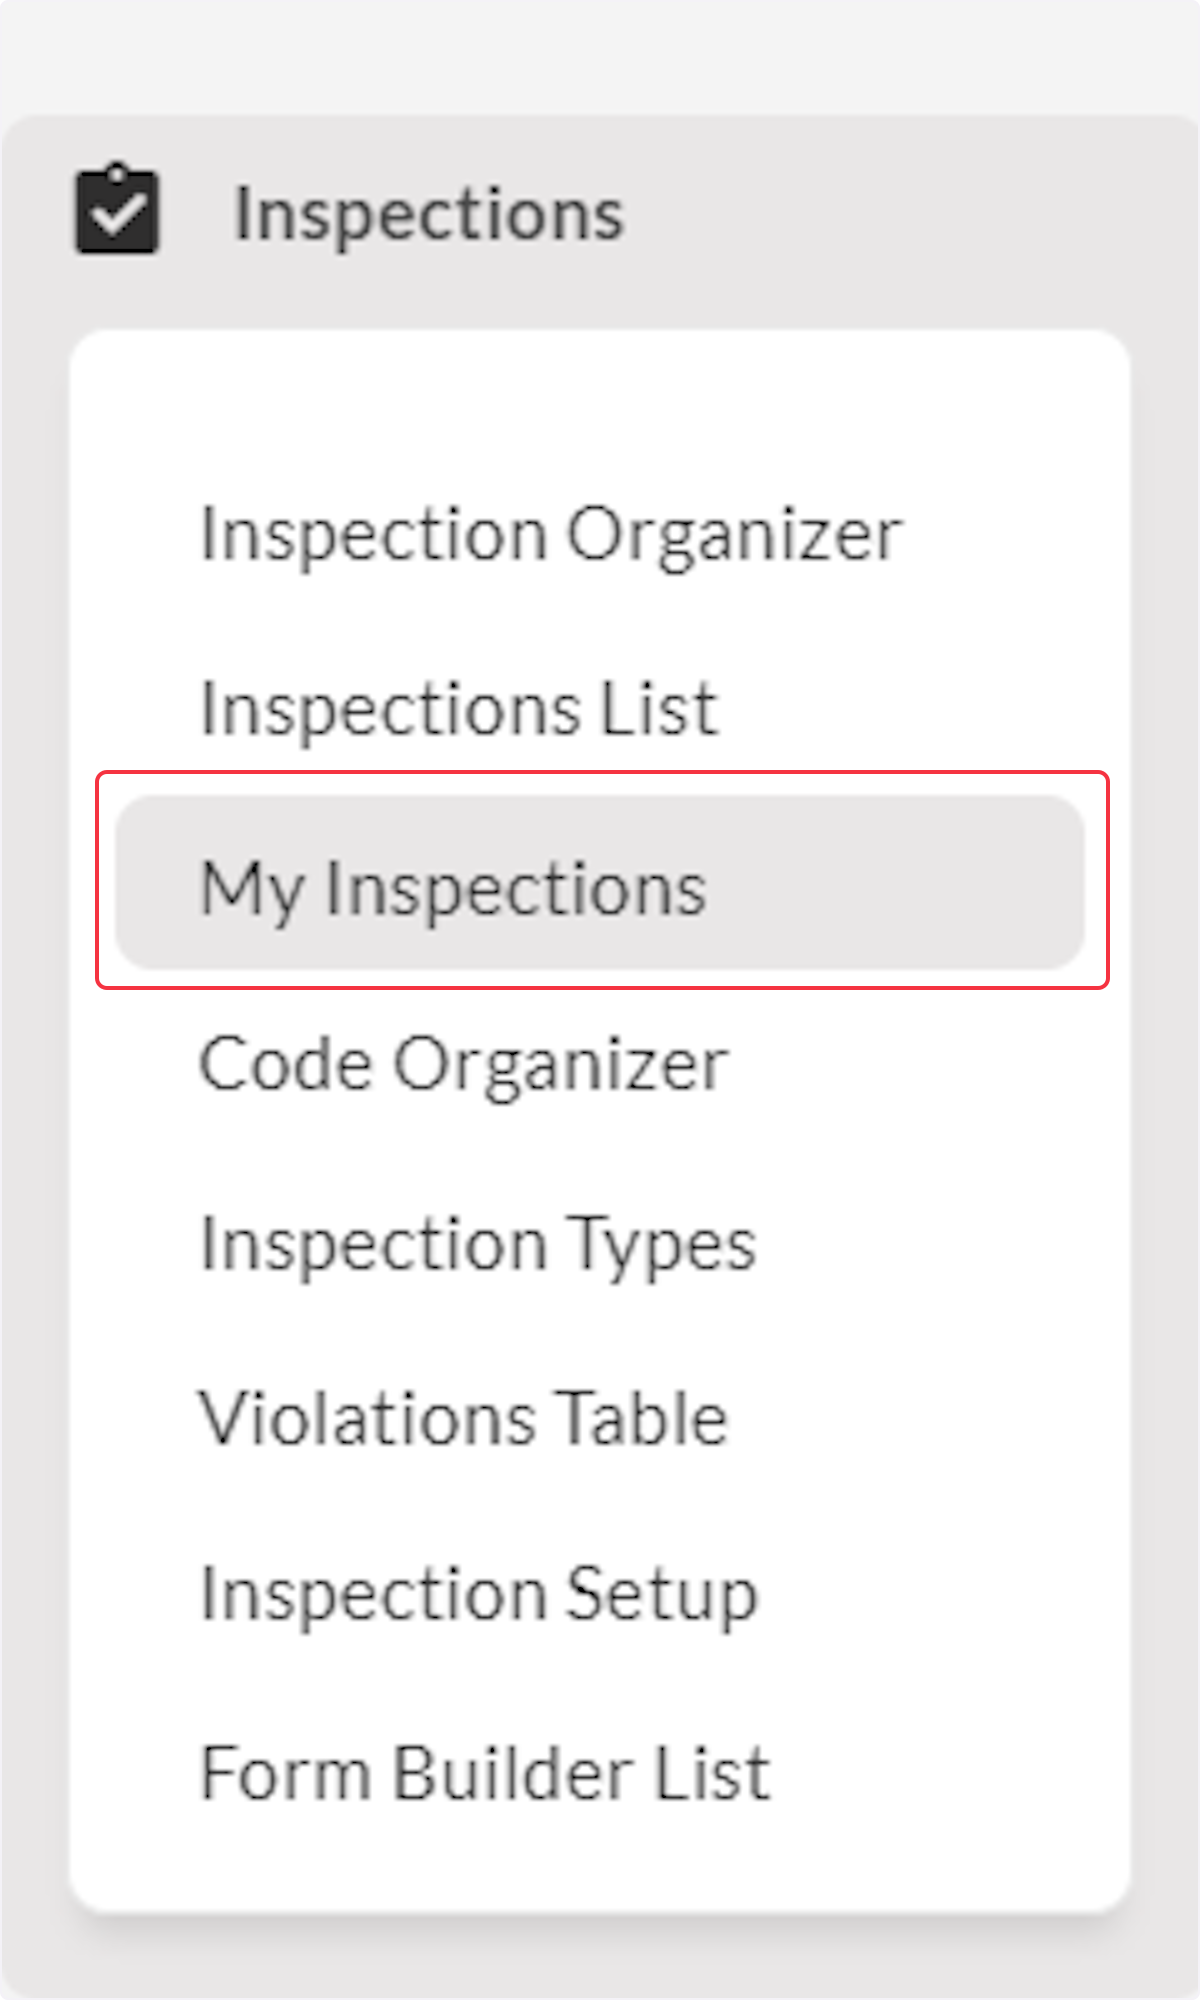 Click on My Inspections.  For Inspections to be viewed on the My Inspections page, the inspections have to be assigned to the signed in user, assigned to a Fire Prevention Team the signed in user is a member of, or inspections the signed in user completed .